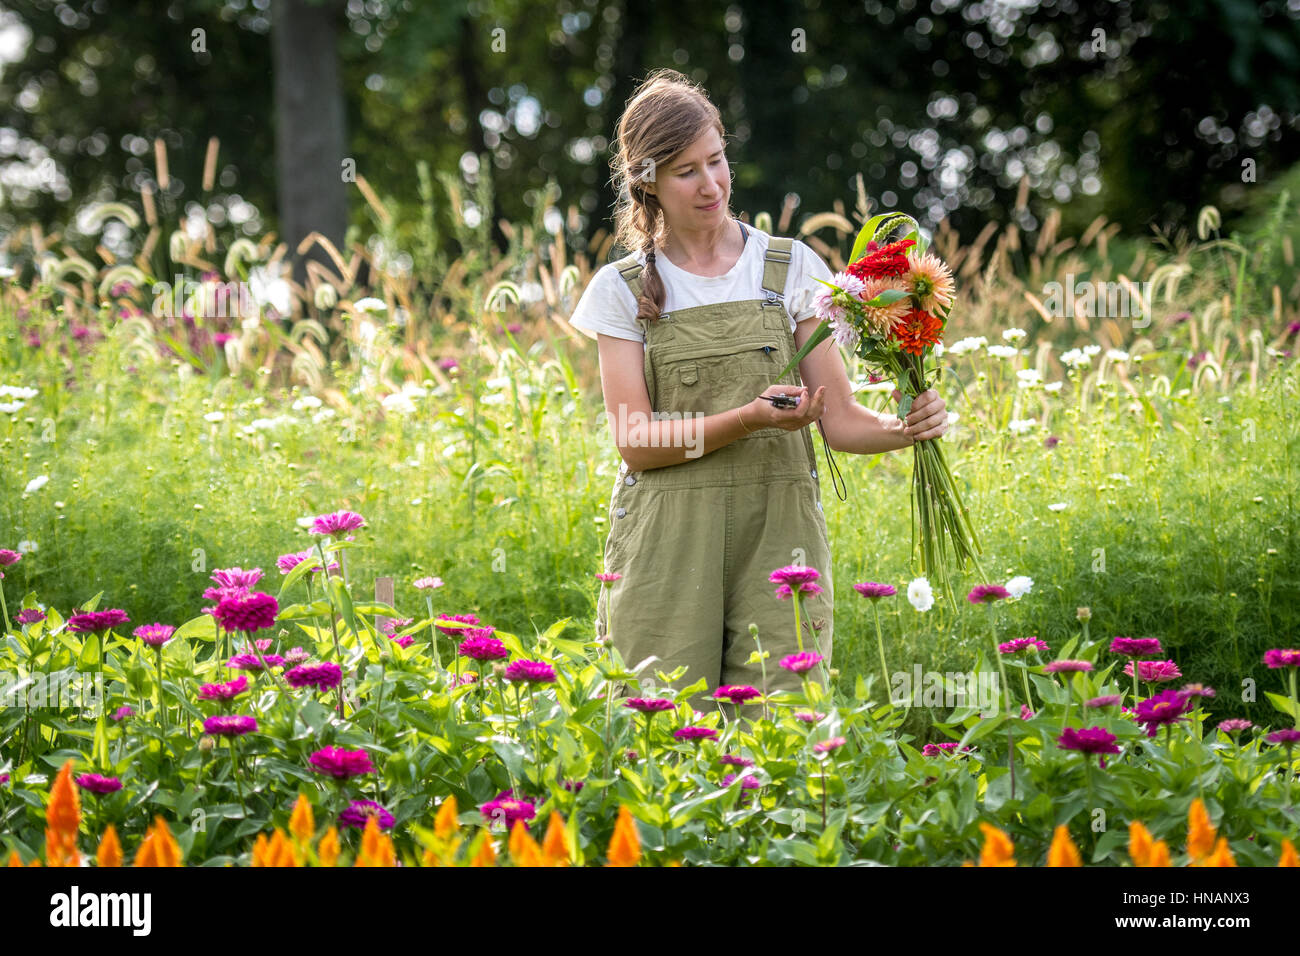 Woman shaping a bouquet of freshly cut flowers from a garden on a farm in rural Maryland, Stock Photo